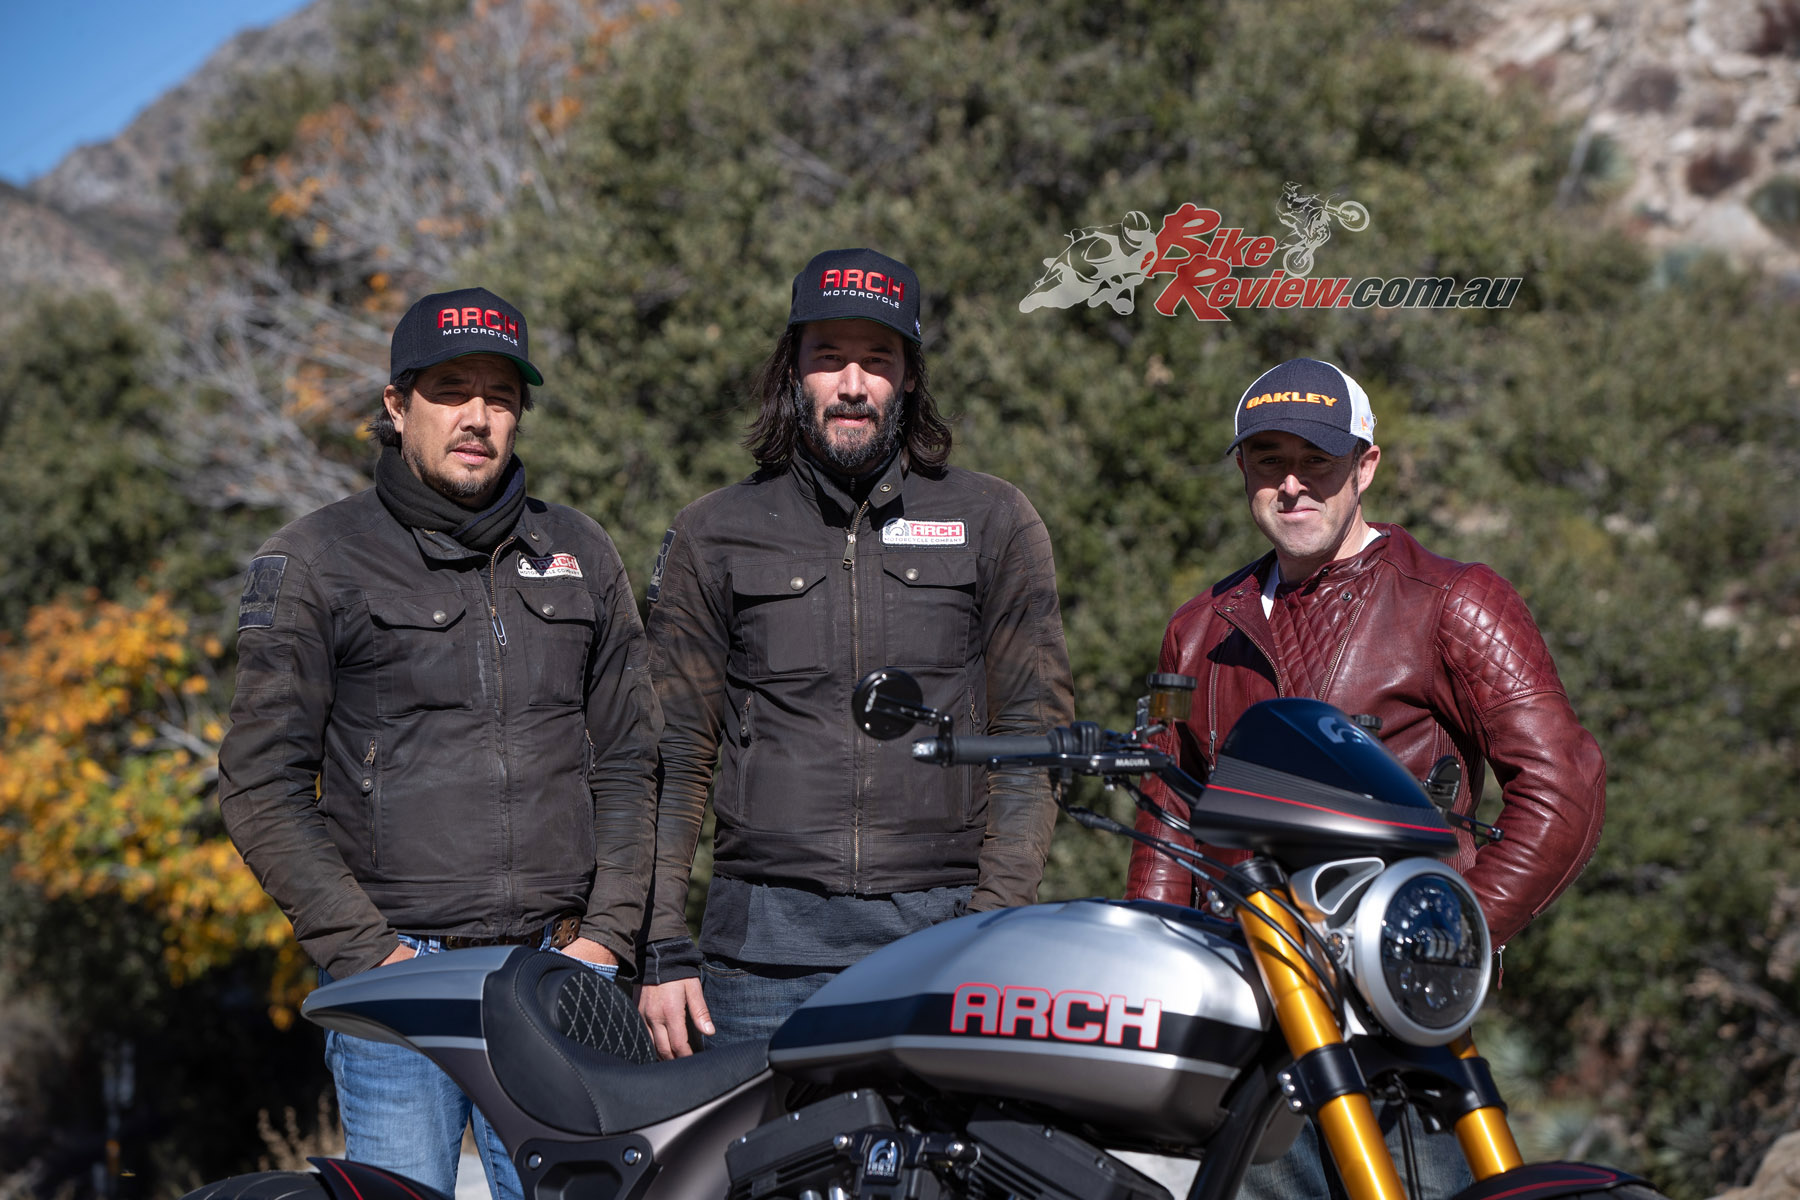 Interview Keanu Reeves And Gard Holinger Arch Motorcycles Bike Review